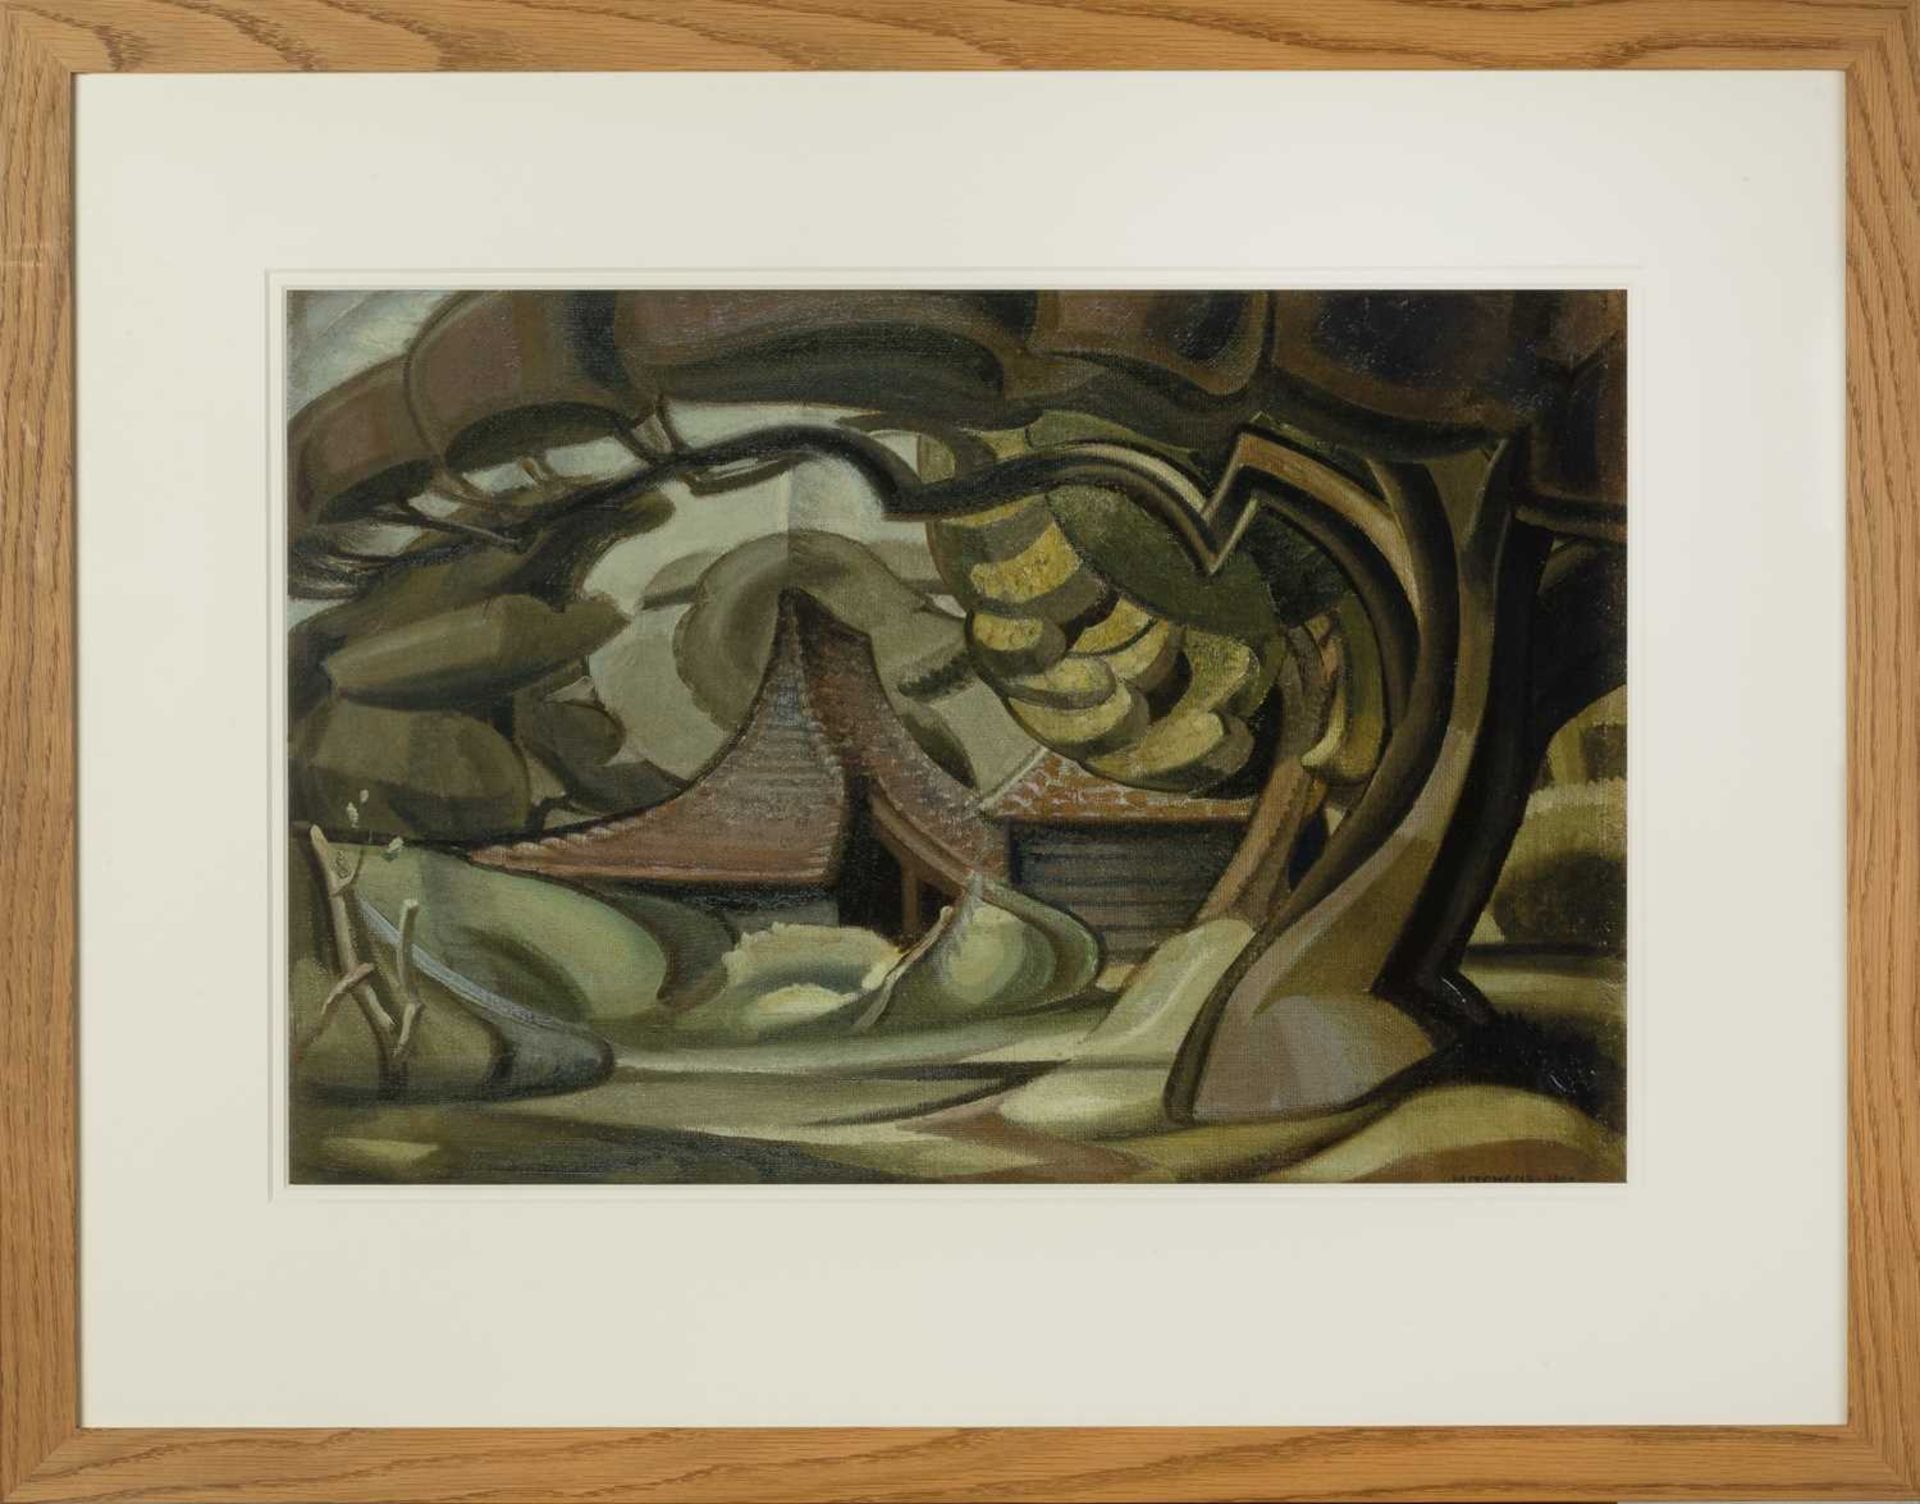 Ivon Hitchens (1893-1979) Curved Barn giclee print 35 x 53cm. Provenance: The Goldmark Gallery, - Image 2 of 3